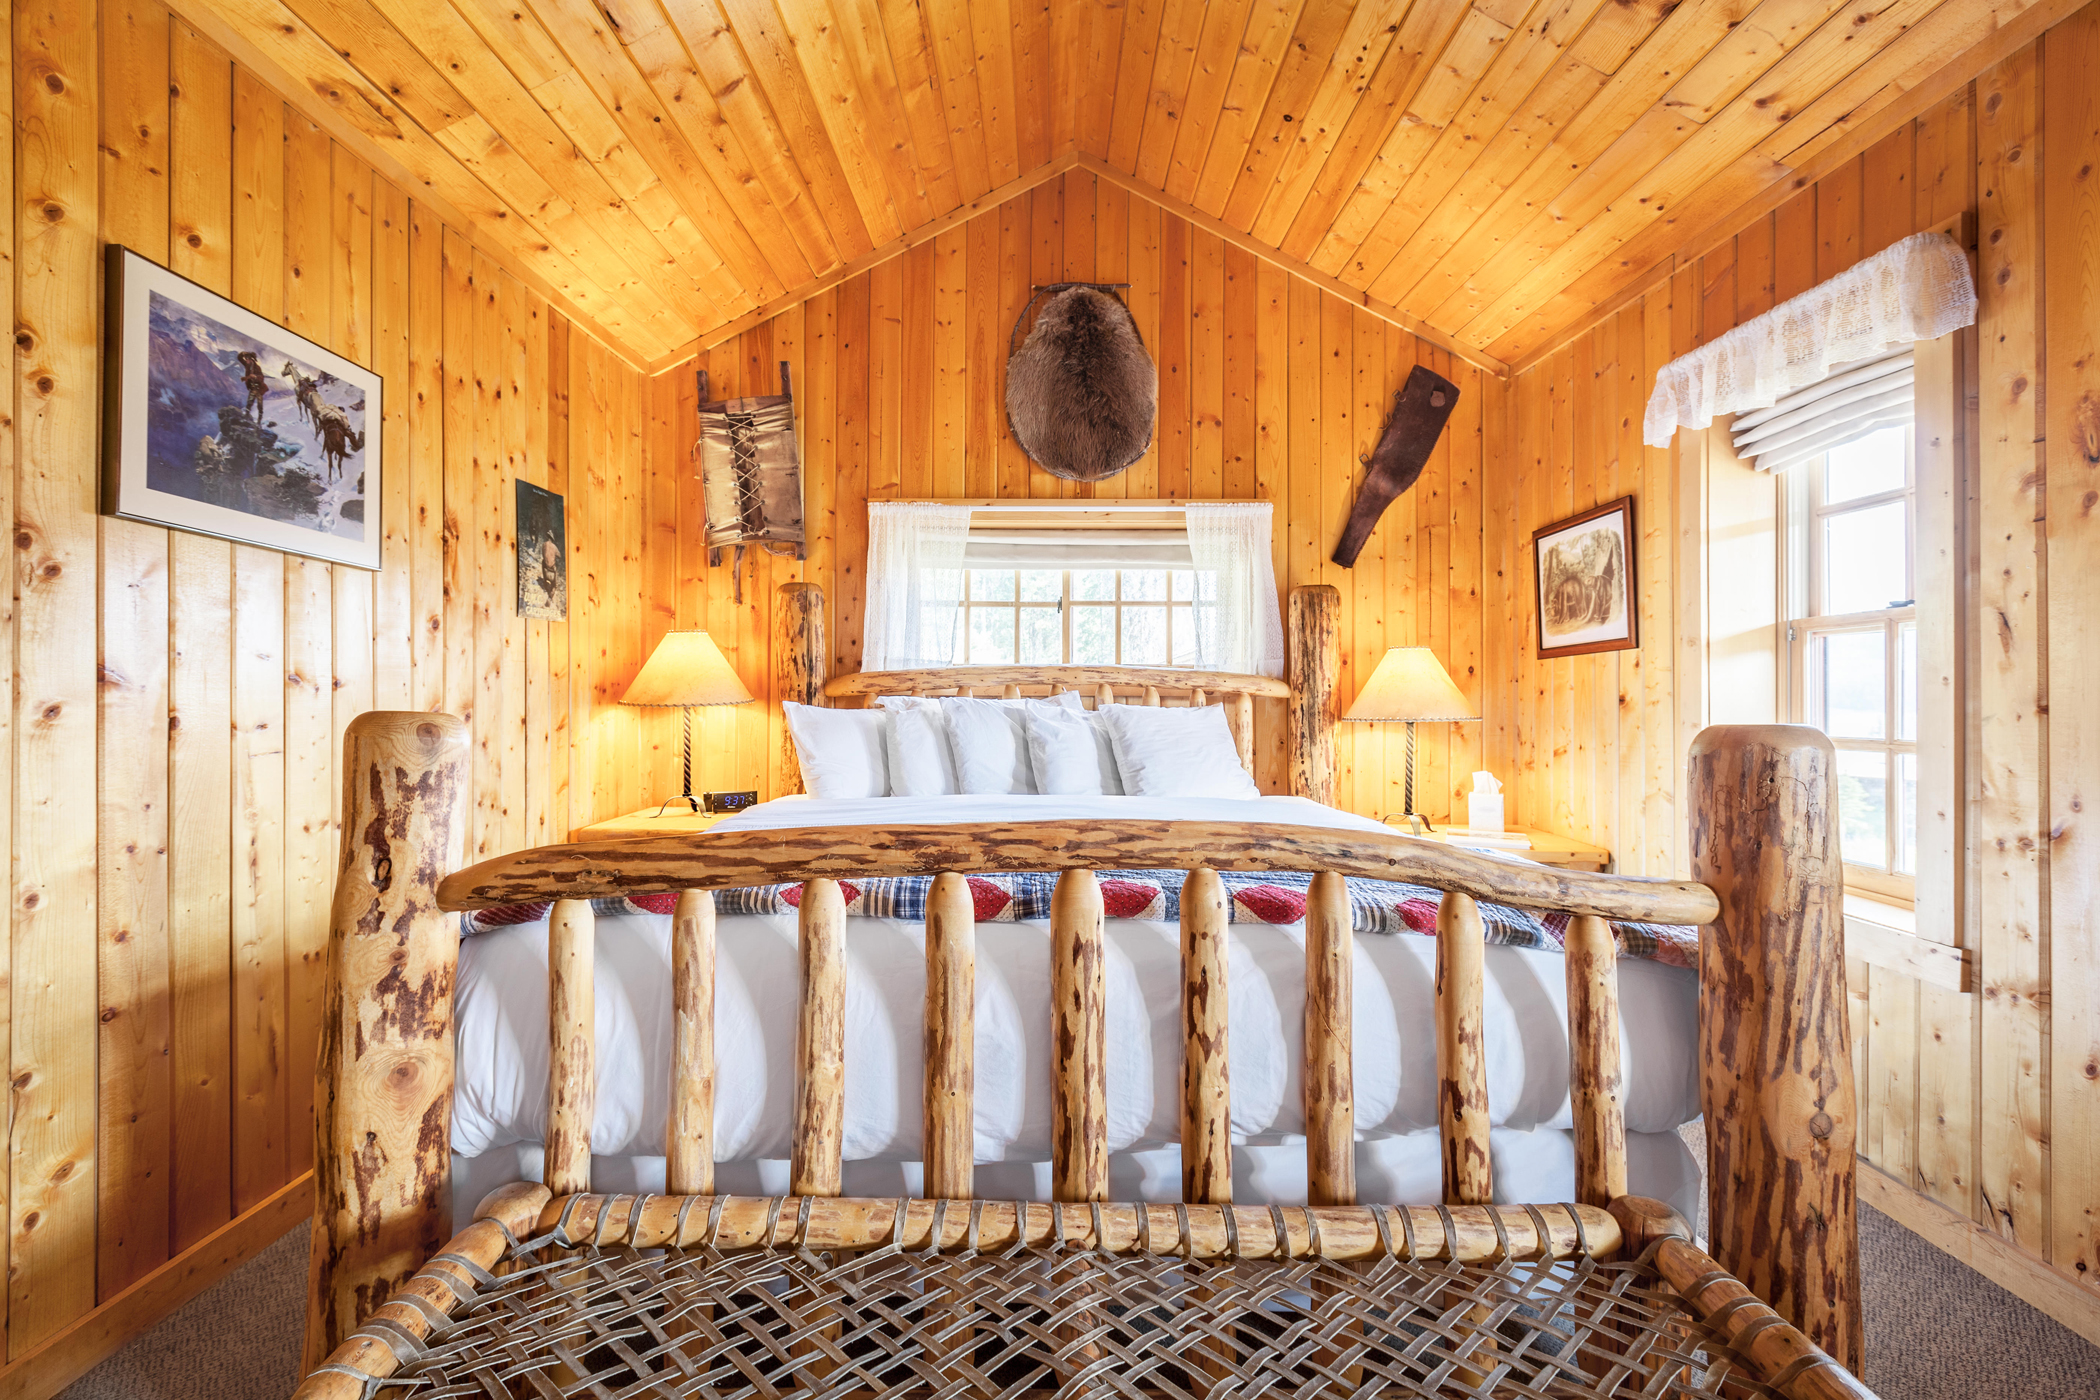 The guest suites and cabins at Brooks Lake Lodge feature goose down bedding, cozy robes and great views of Wyoming’s surrounding nature-filled landscape.